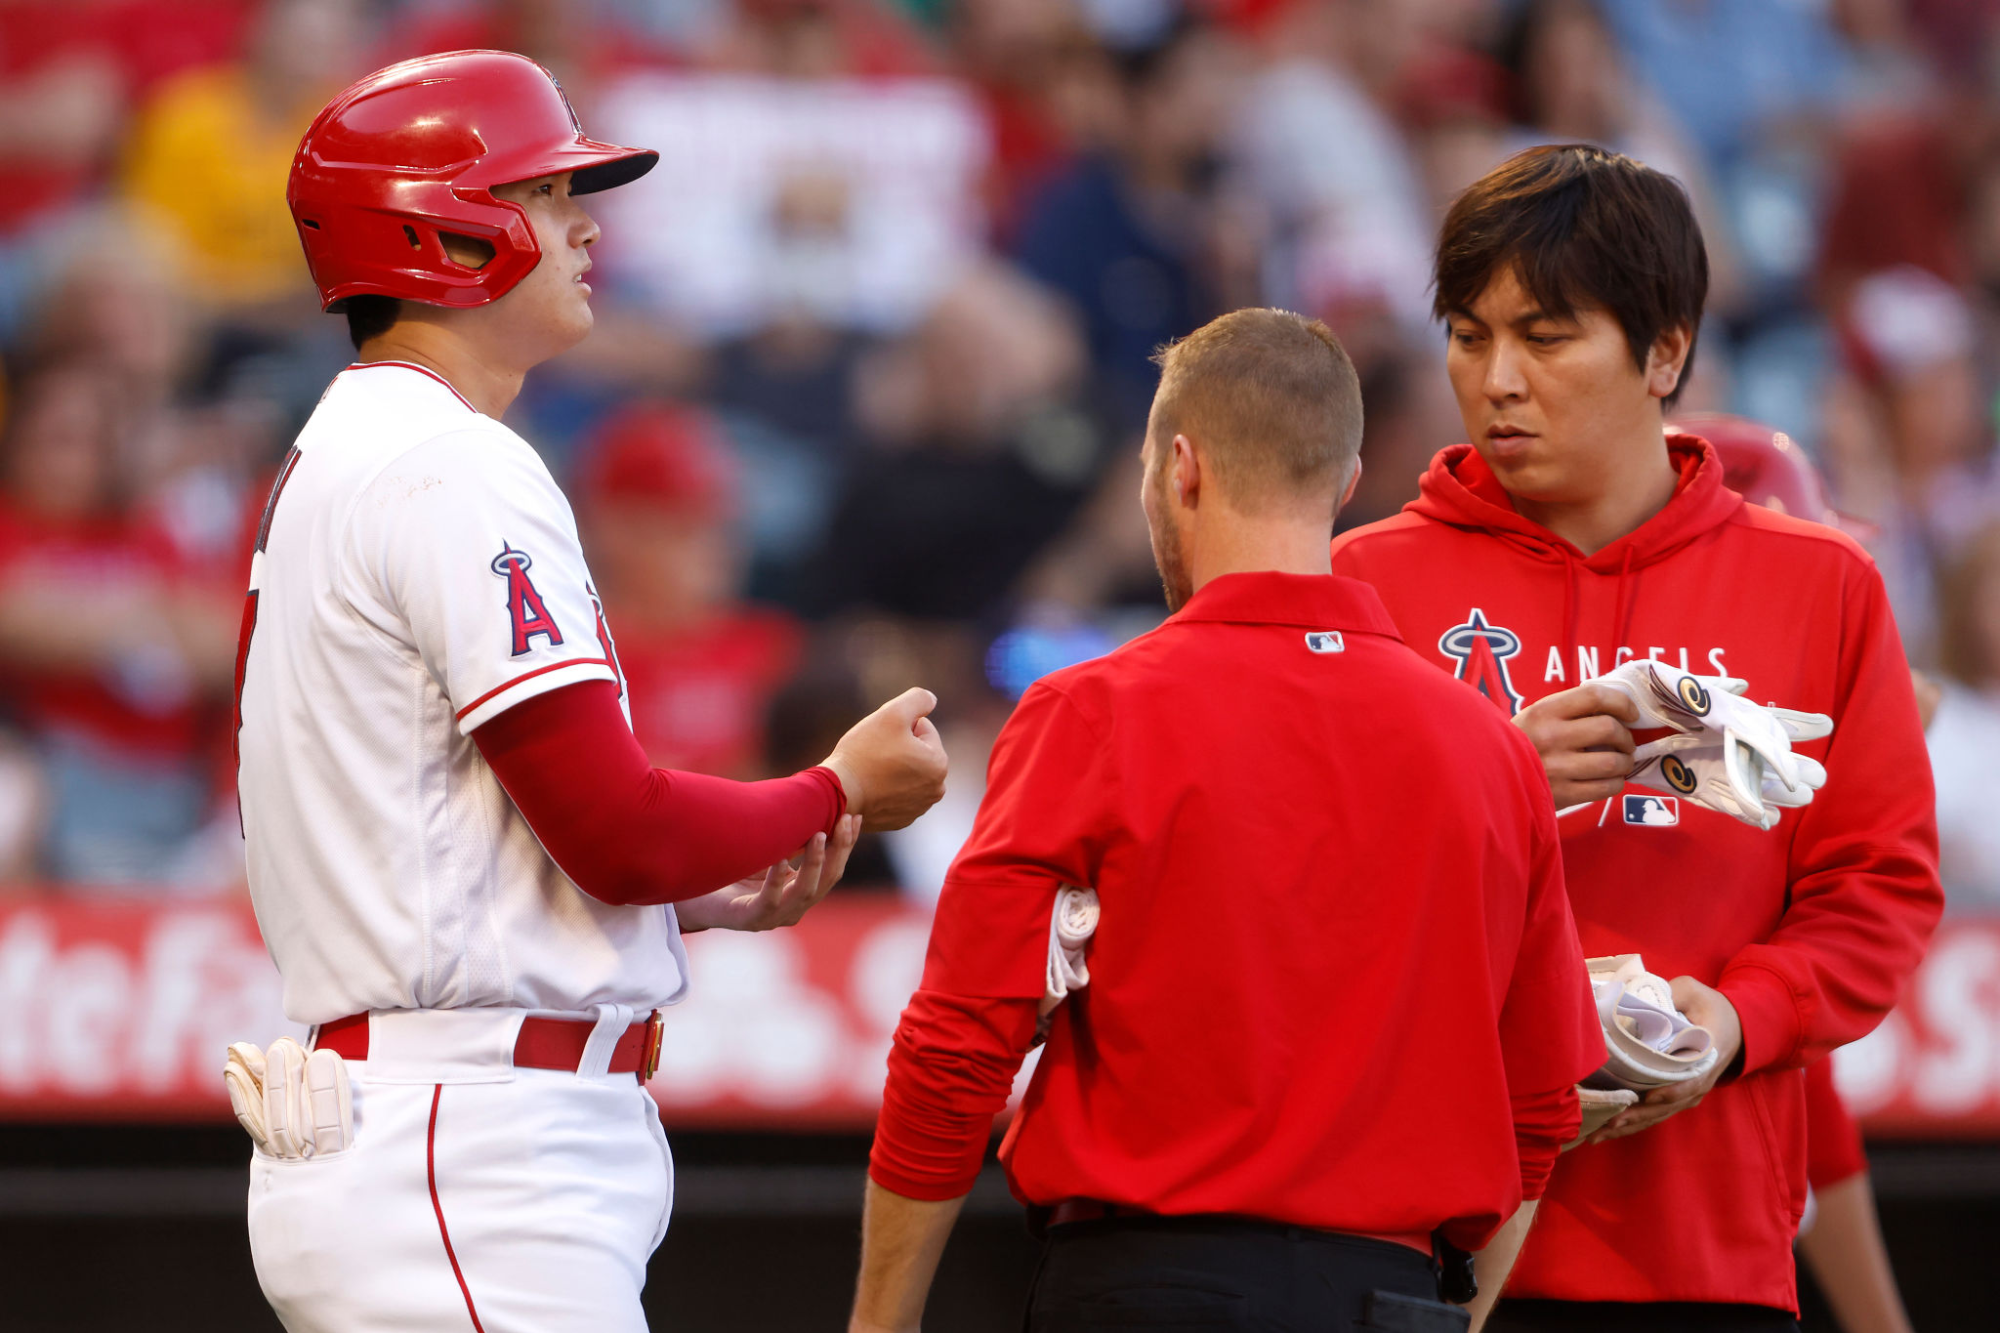 ngels star Shohei Ohtani talks to a team trainer, center, while with his translator.